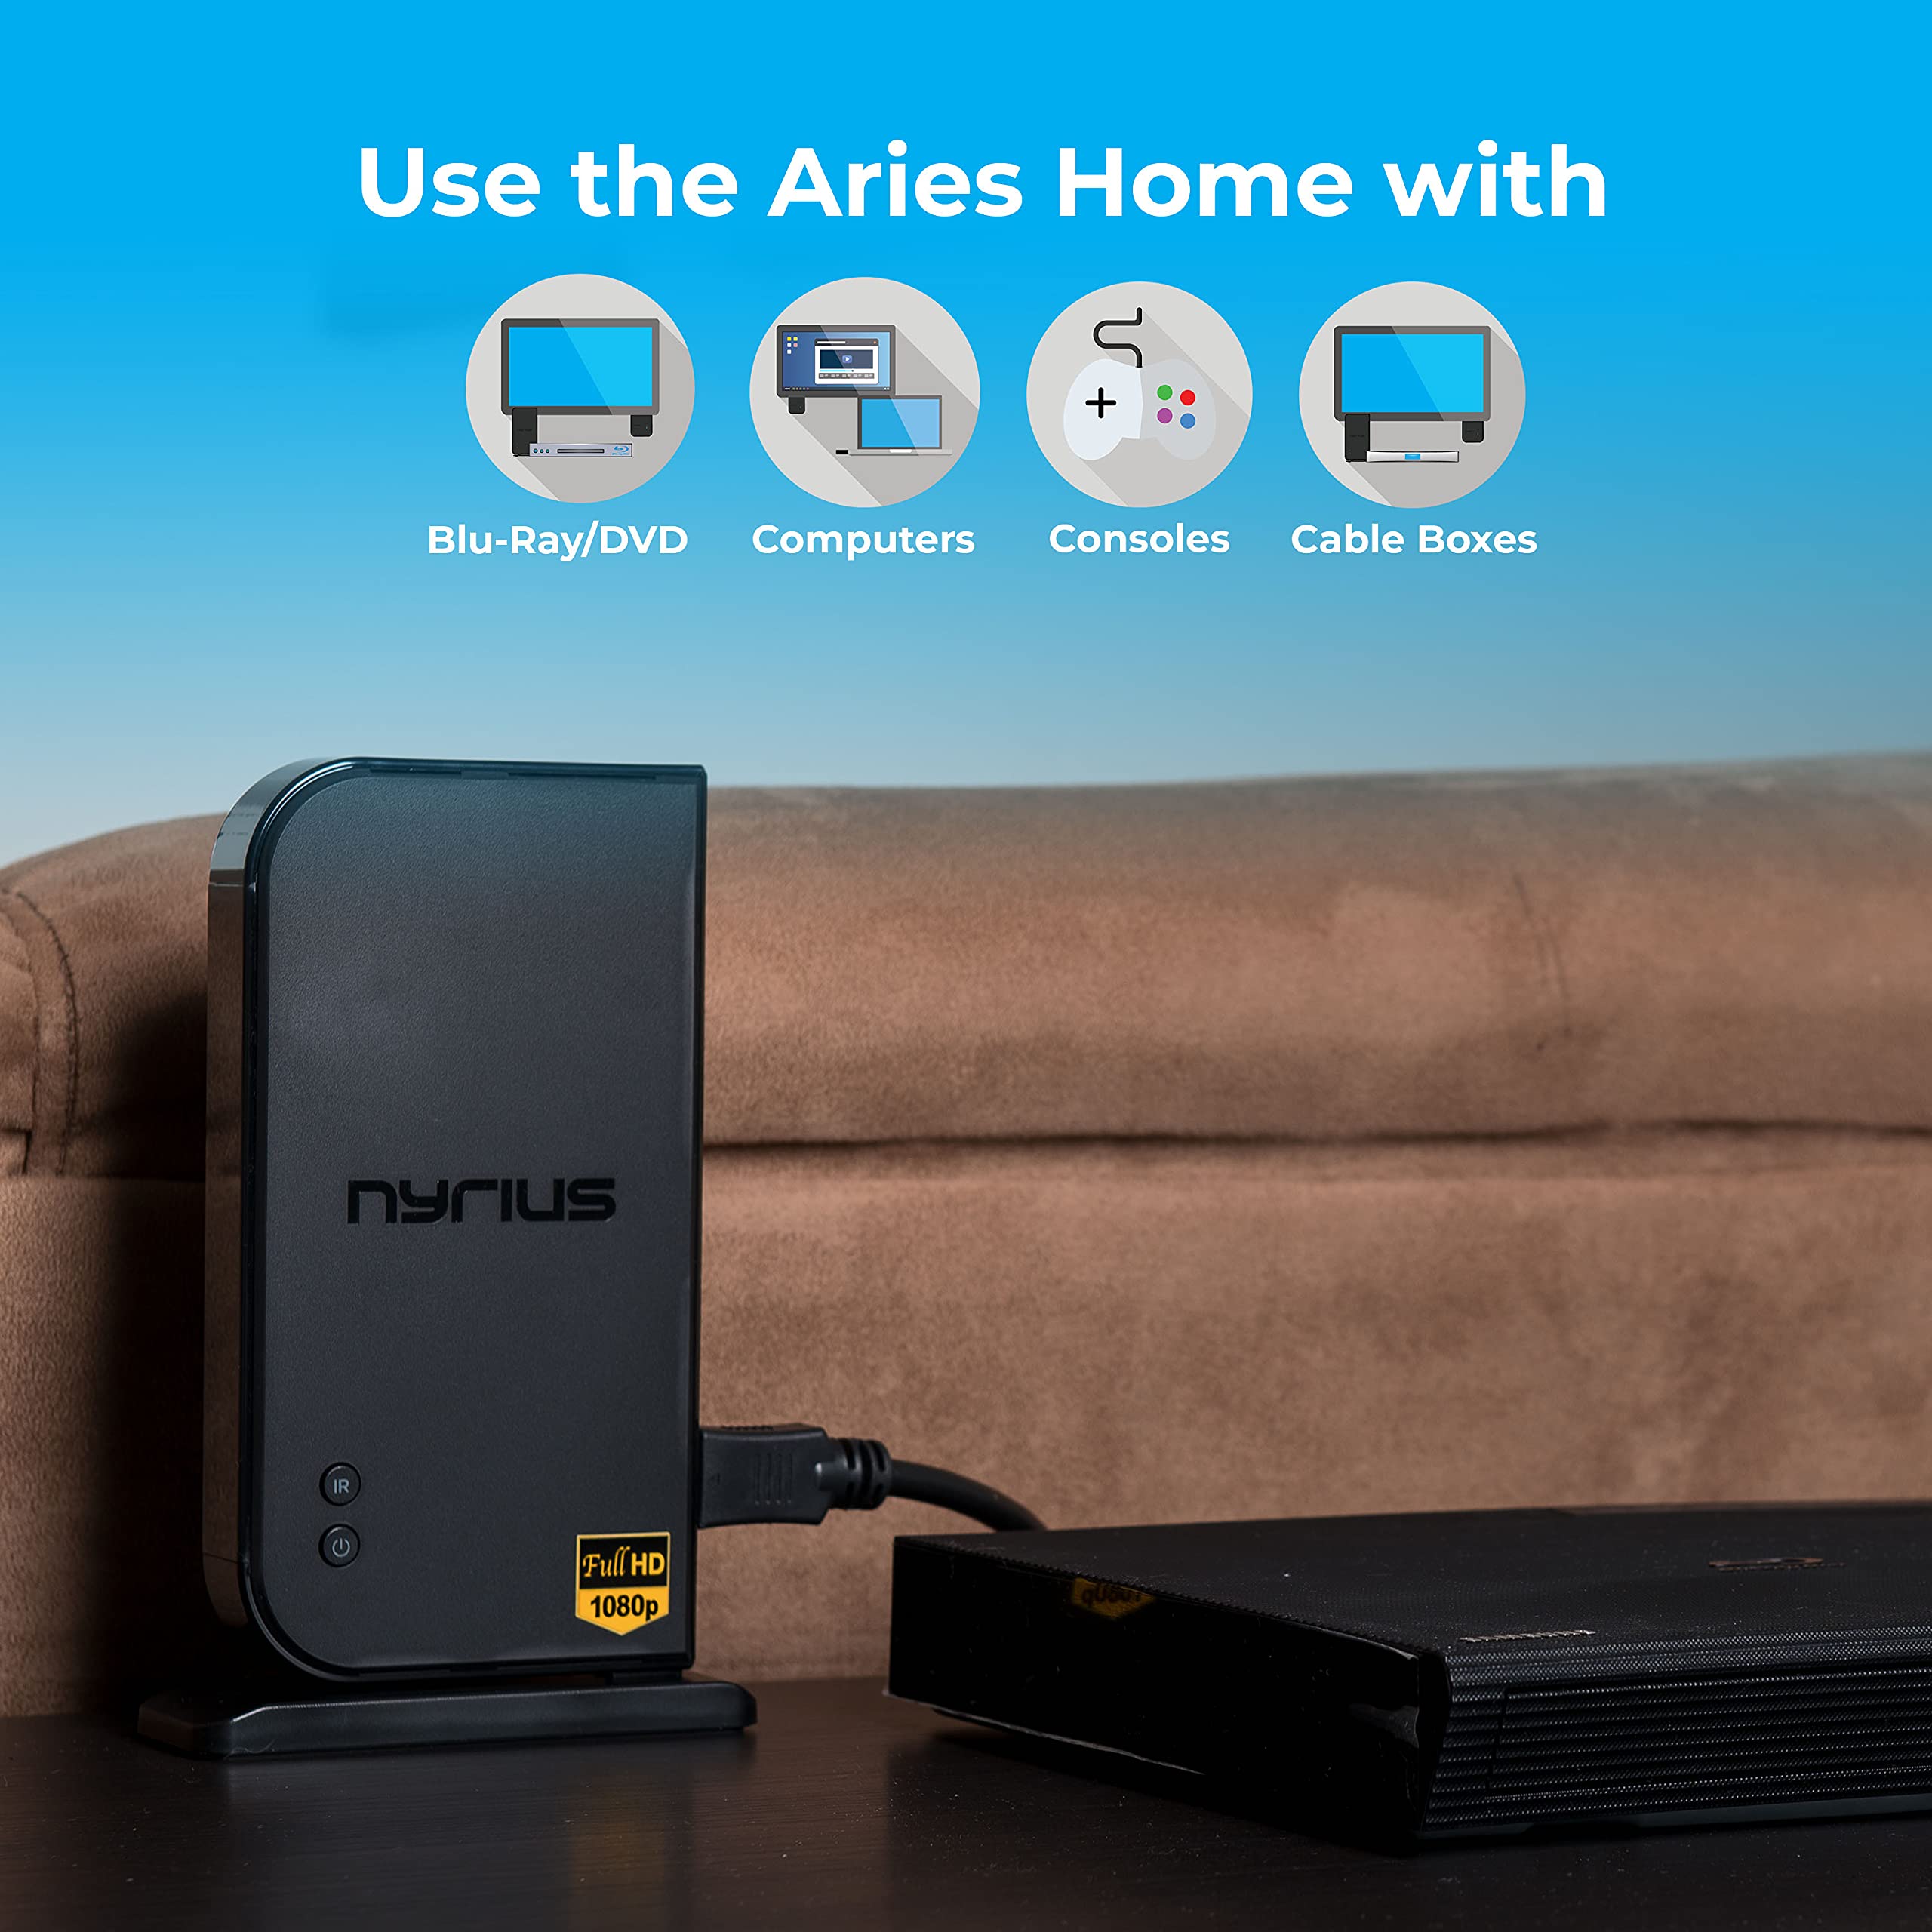 Nyrius Aries Home HDMI Digital Wireless Transmitter & Receiver for HD 1080p Video Streaming, Cable Box, Satellite, Bluray, DVD, PS3, PS4, Laptops, PC (NAVS500)